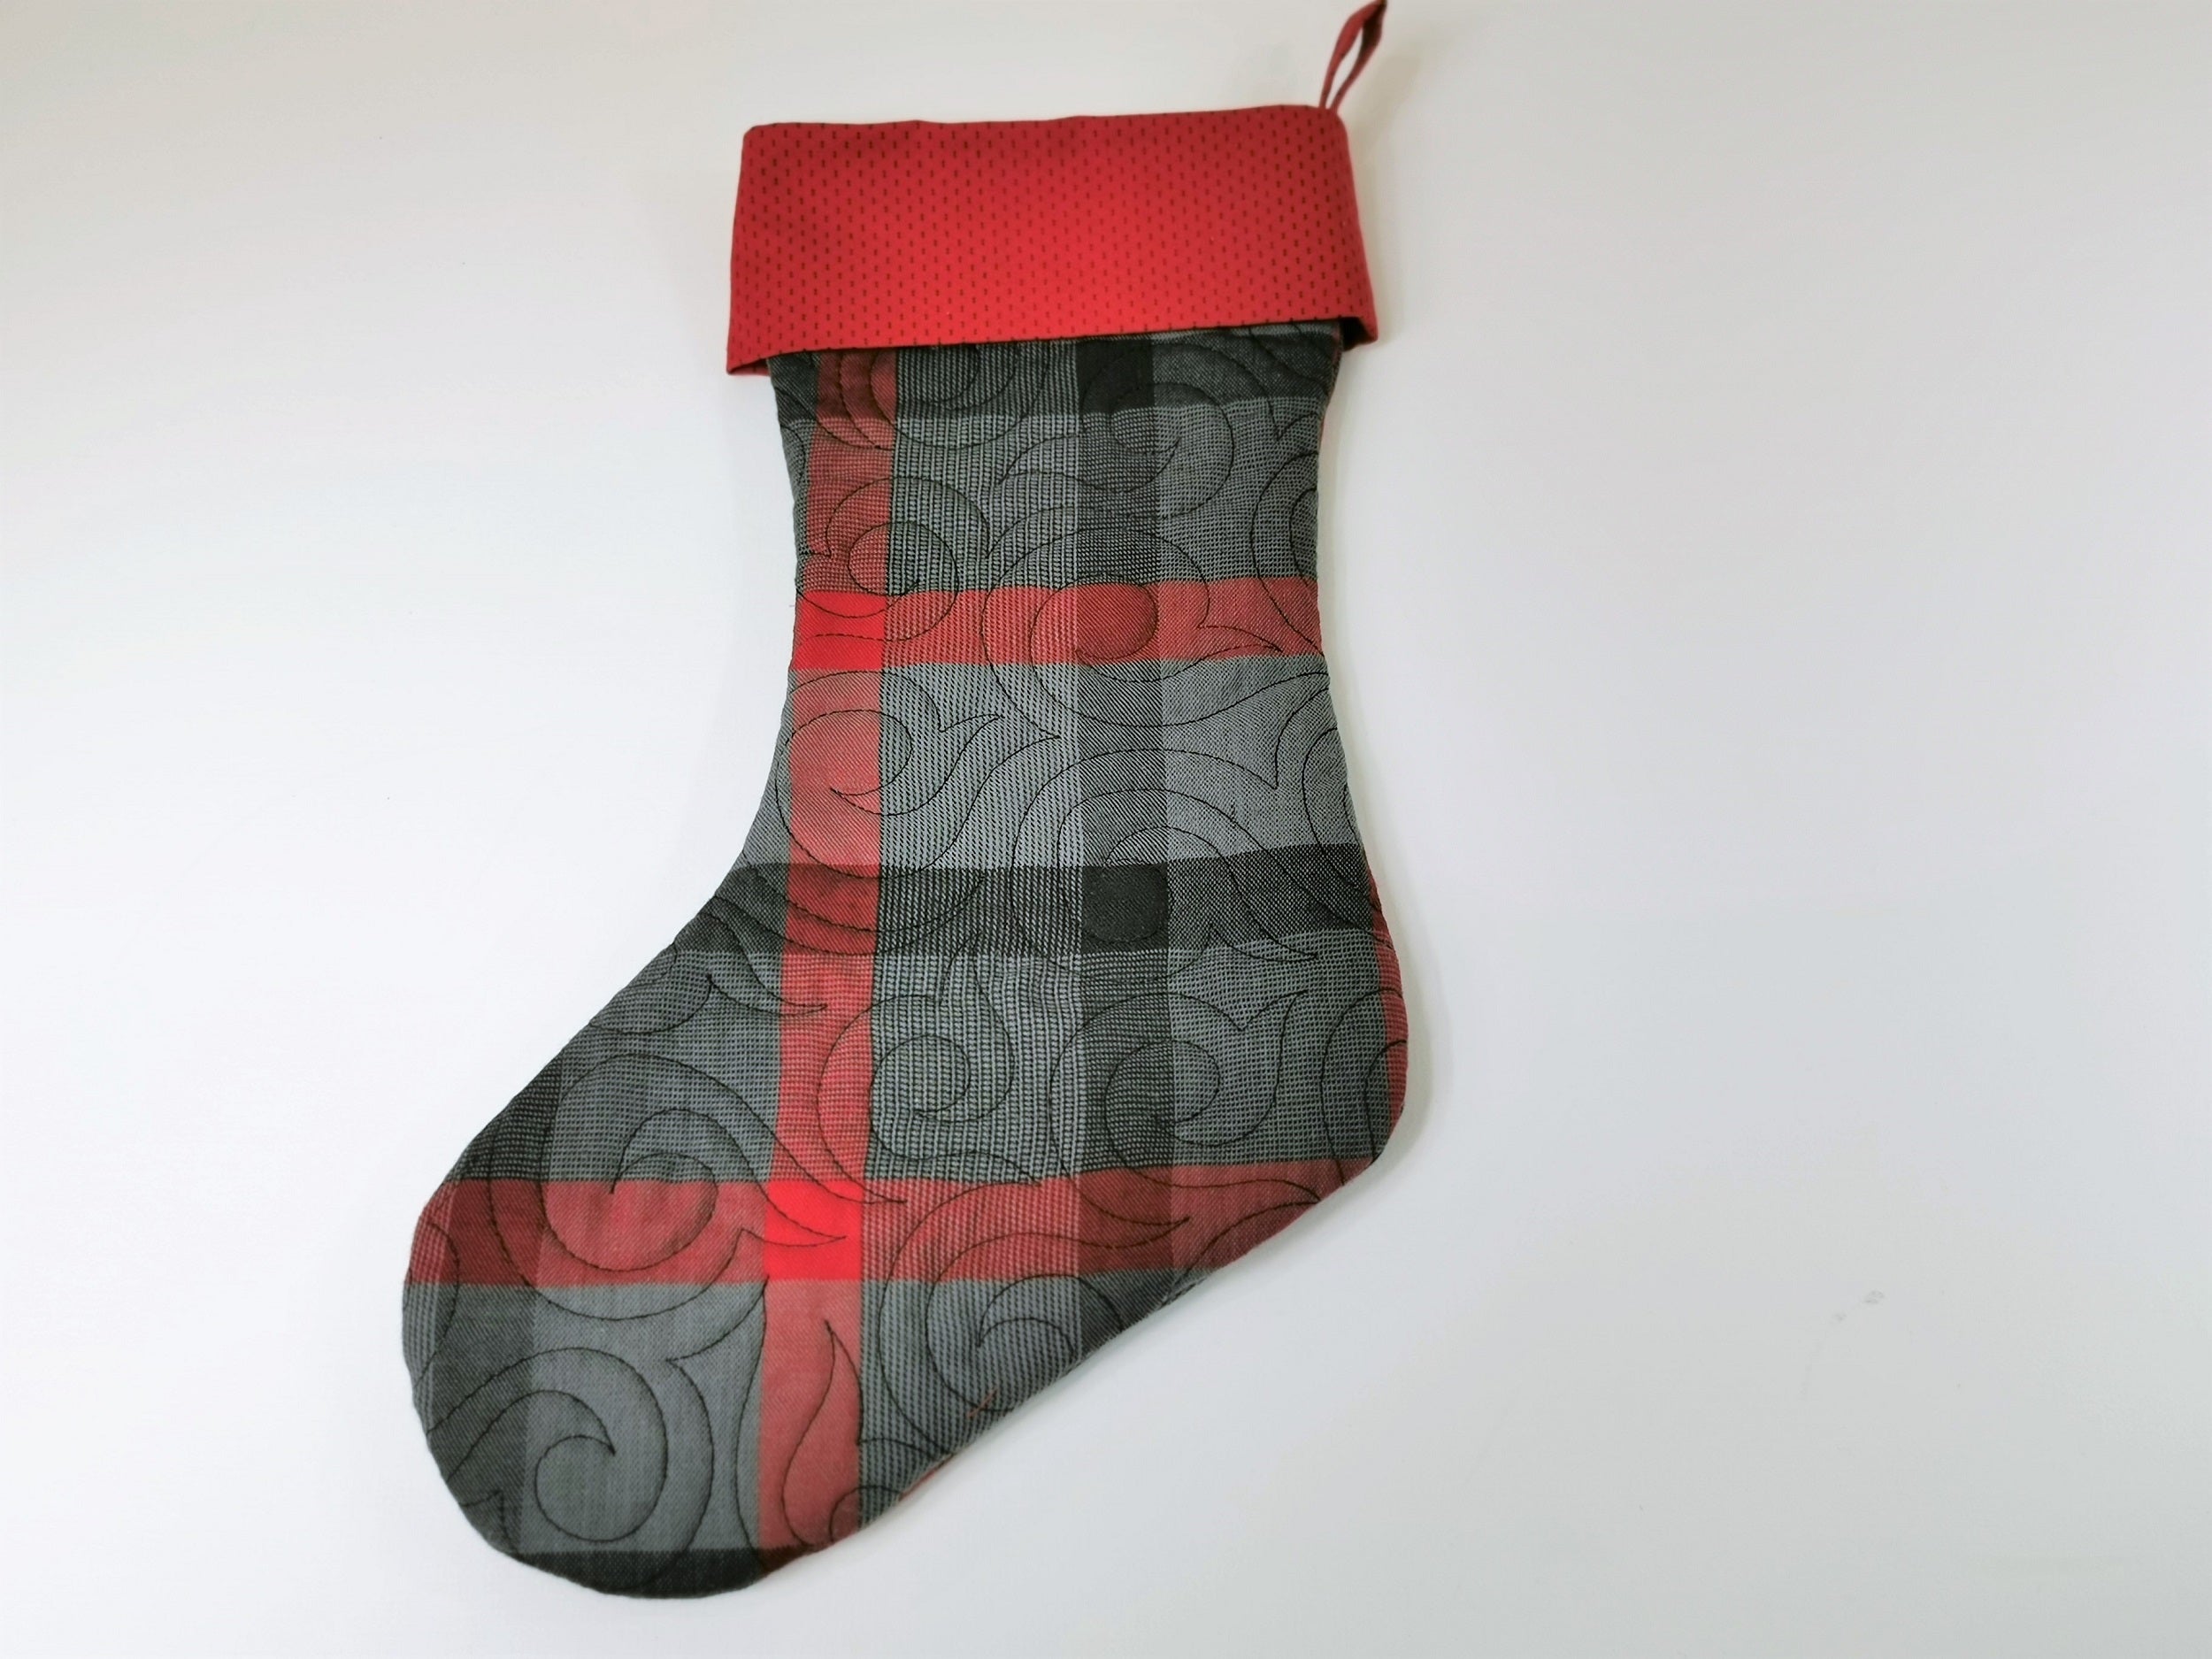 quilted christmas stocking in large scale, gray and red plaid with red cuff